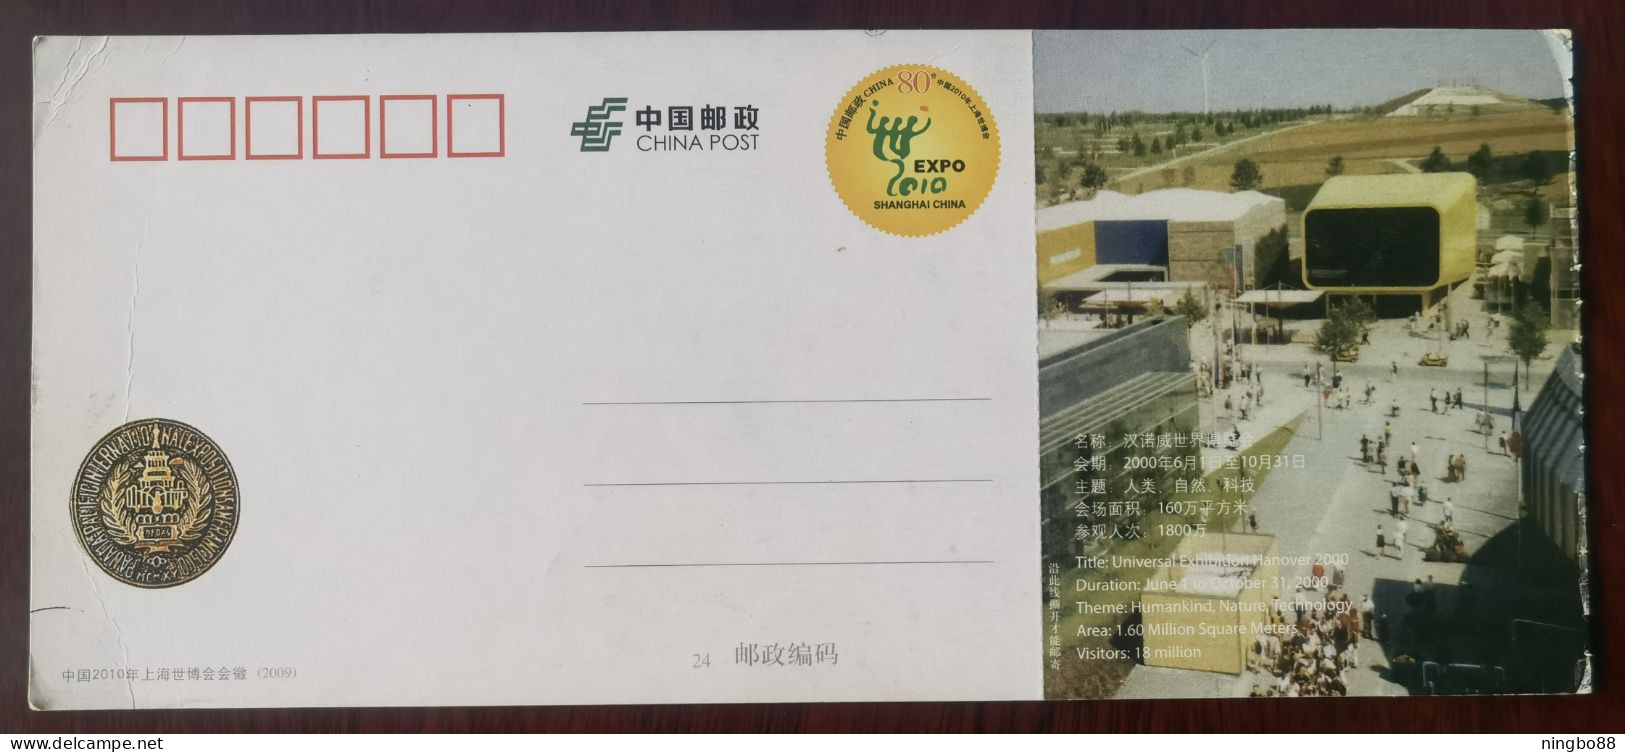 Expo 2000 Hanover Germany,China 2010 Moutai Spirit Designated Liquor For Shanghai World Expo Advert Pre-stamped Card - 2000 – Hanover (Germany)